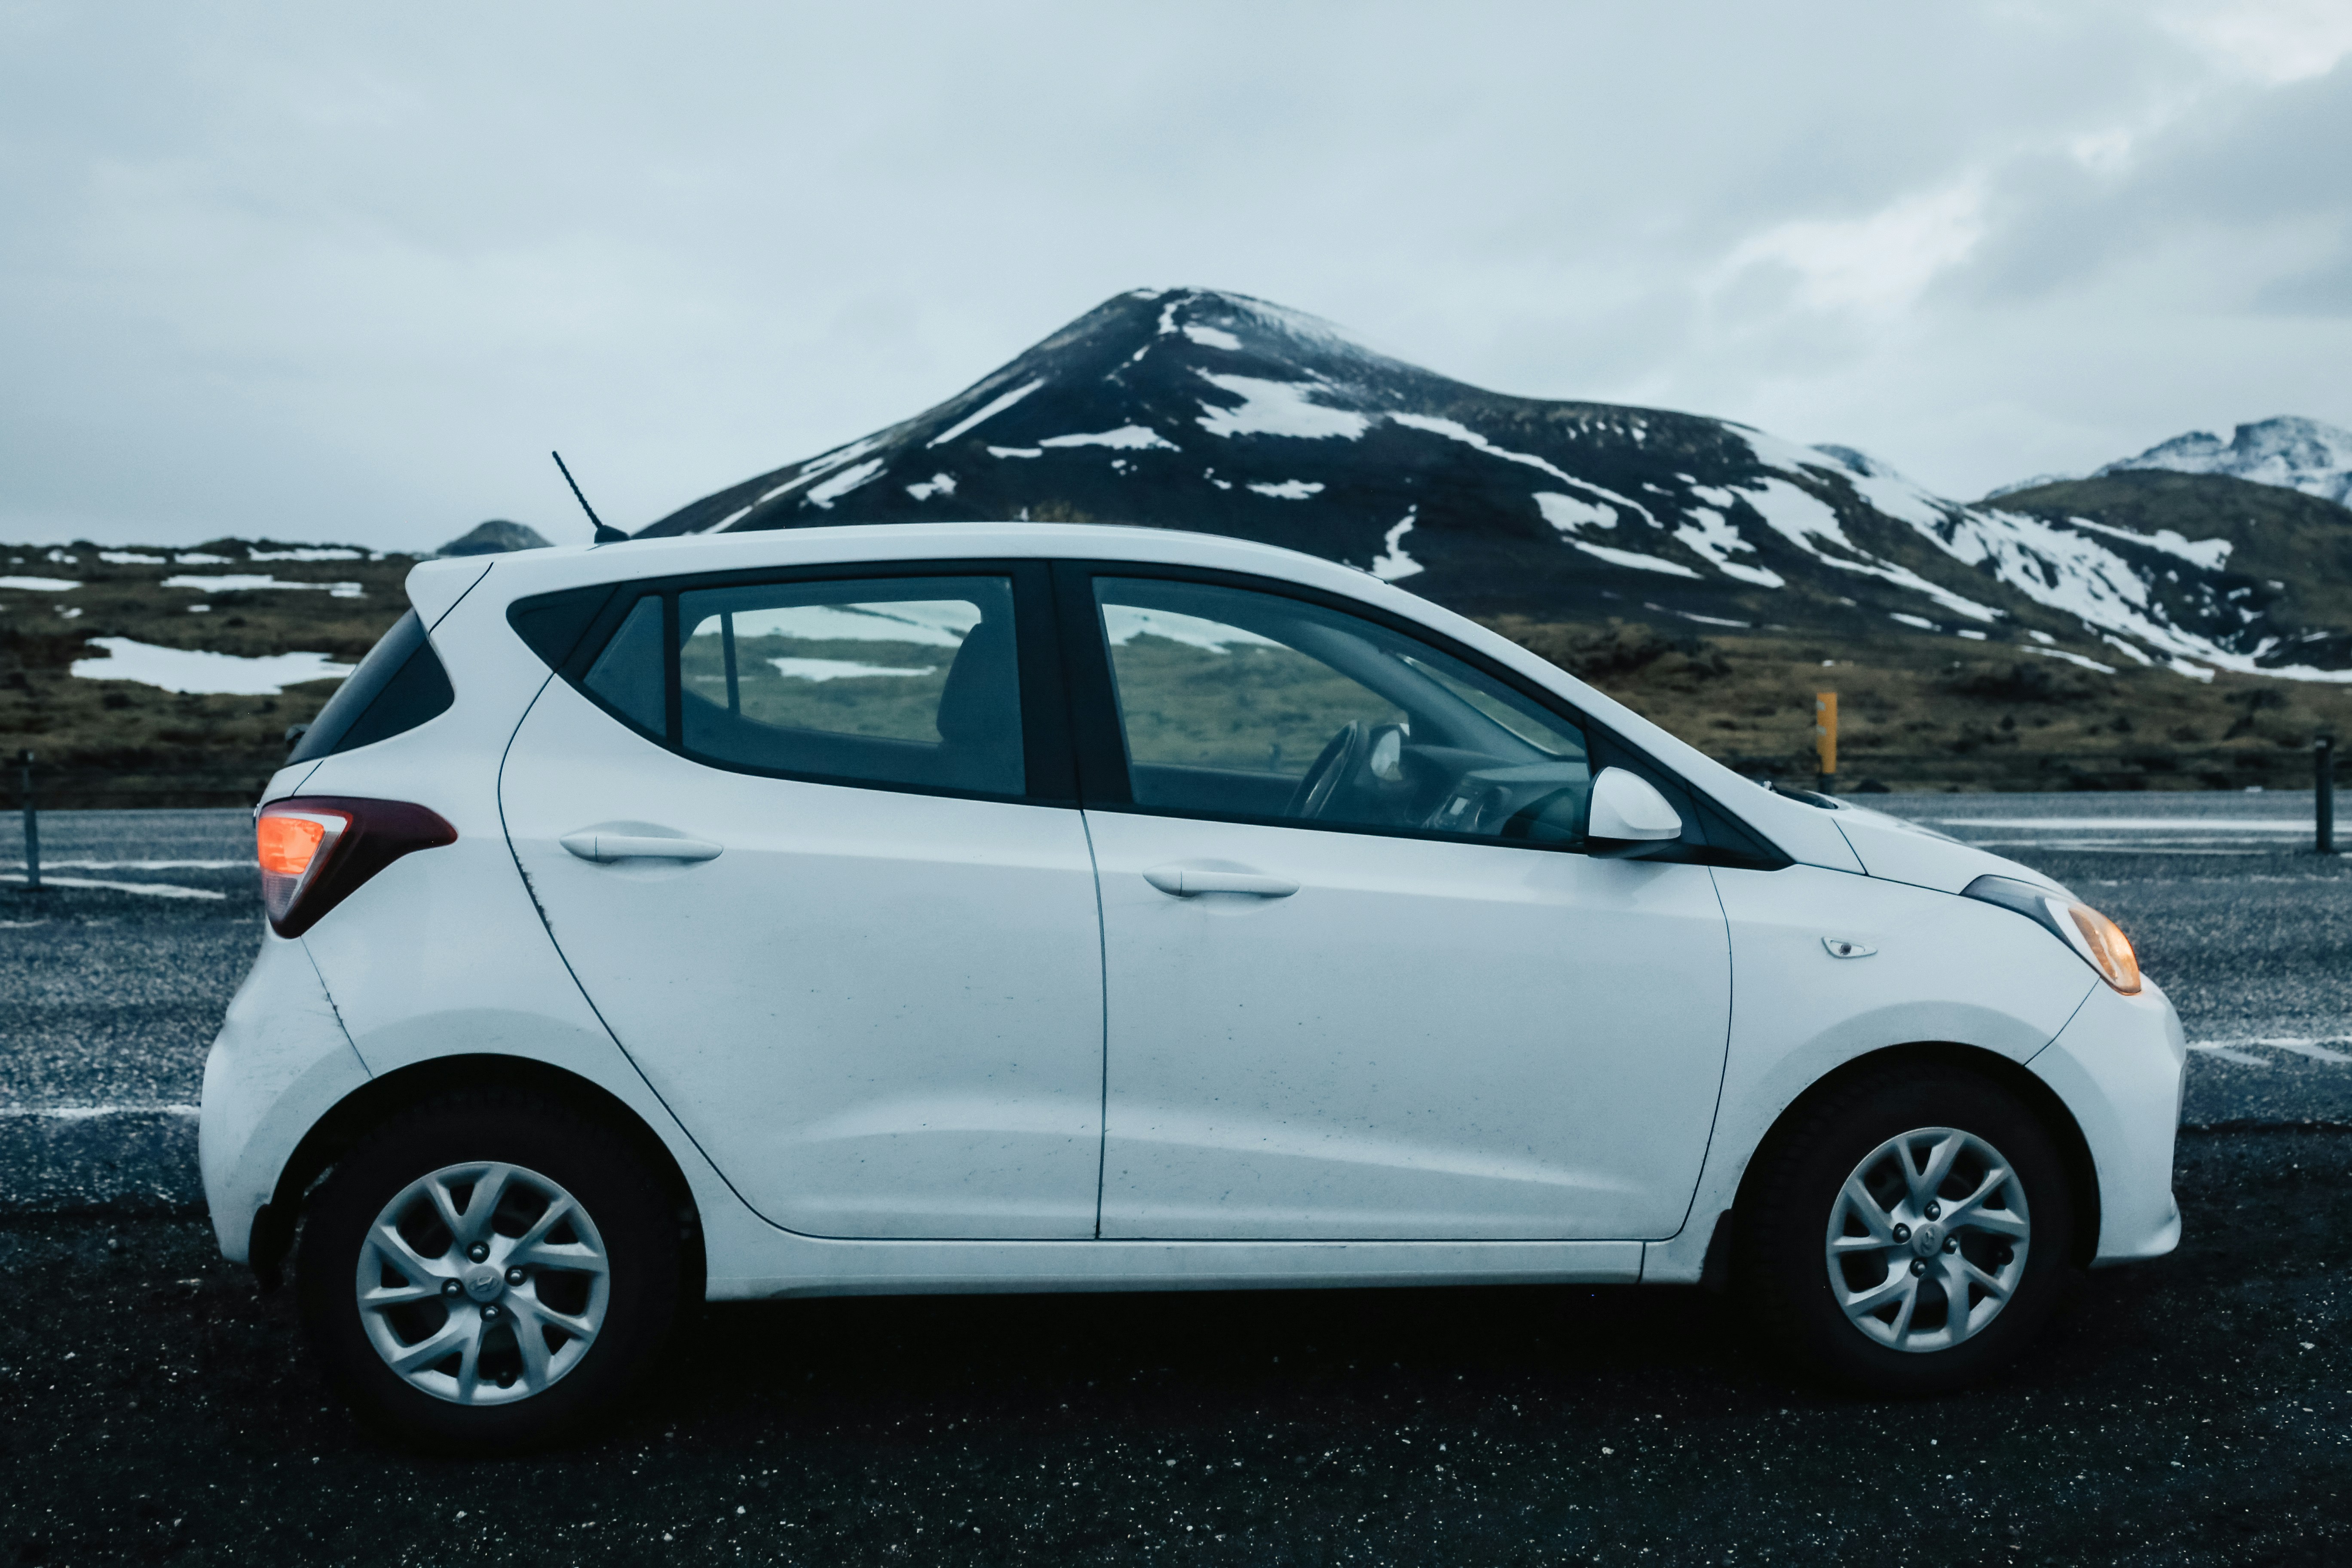 Our small rental car in Iceland